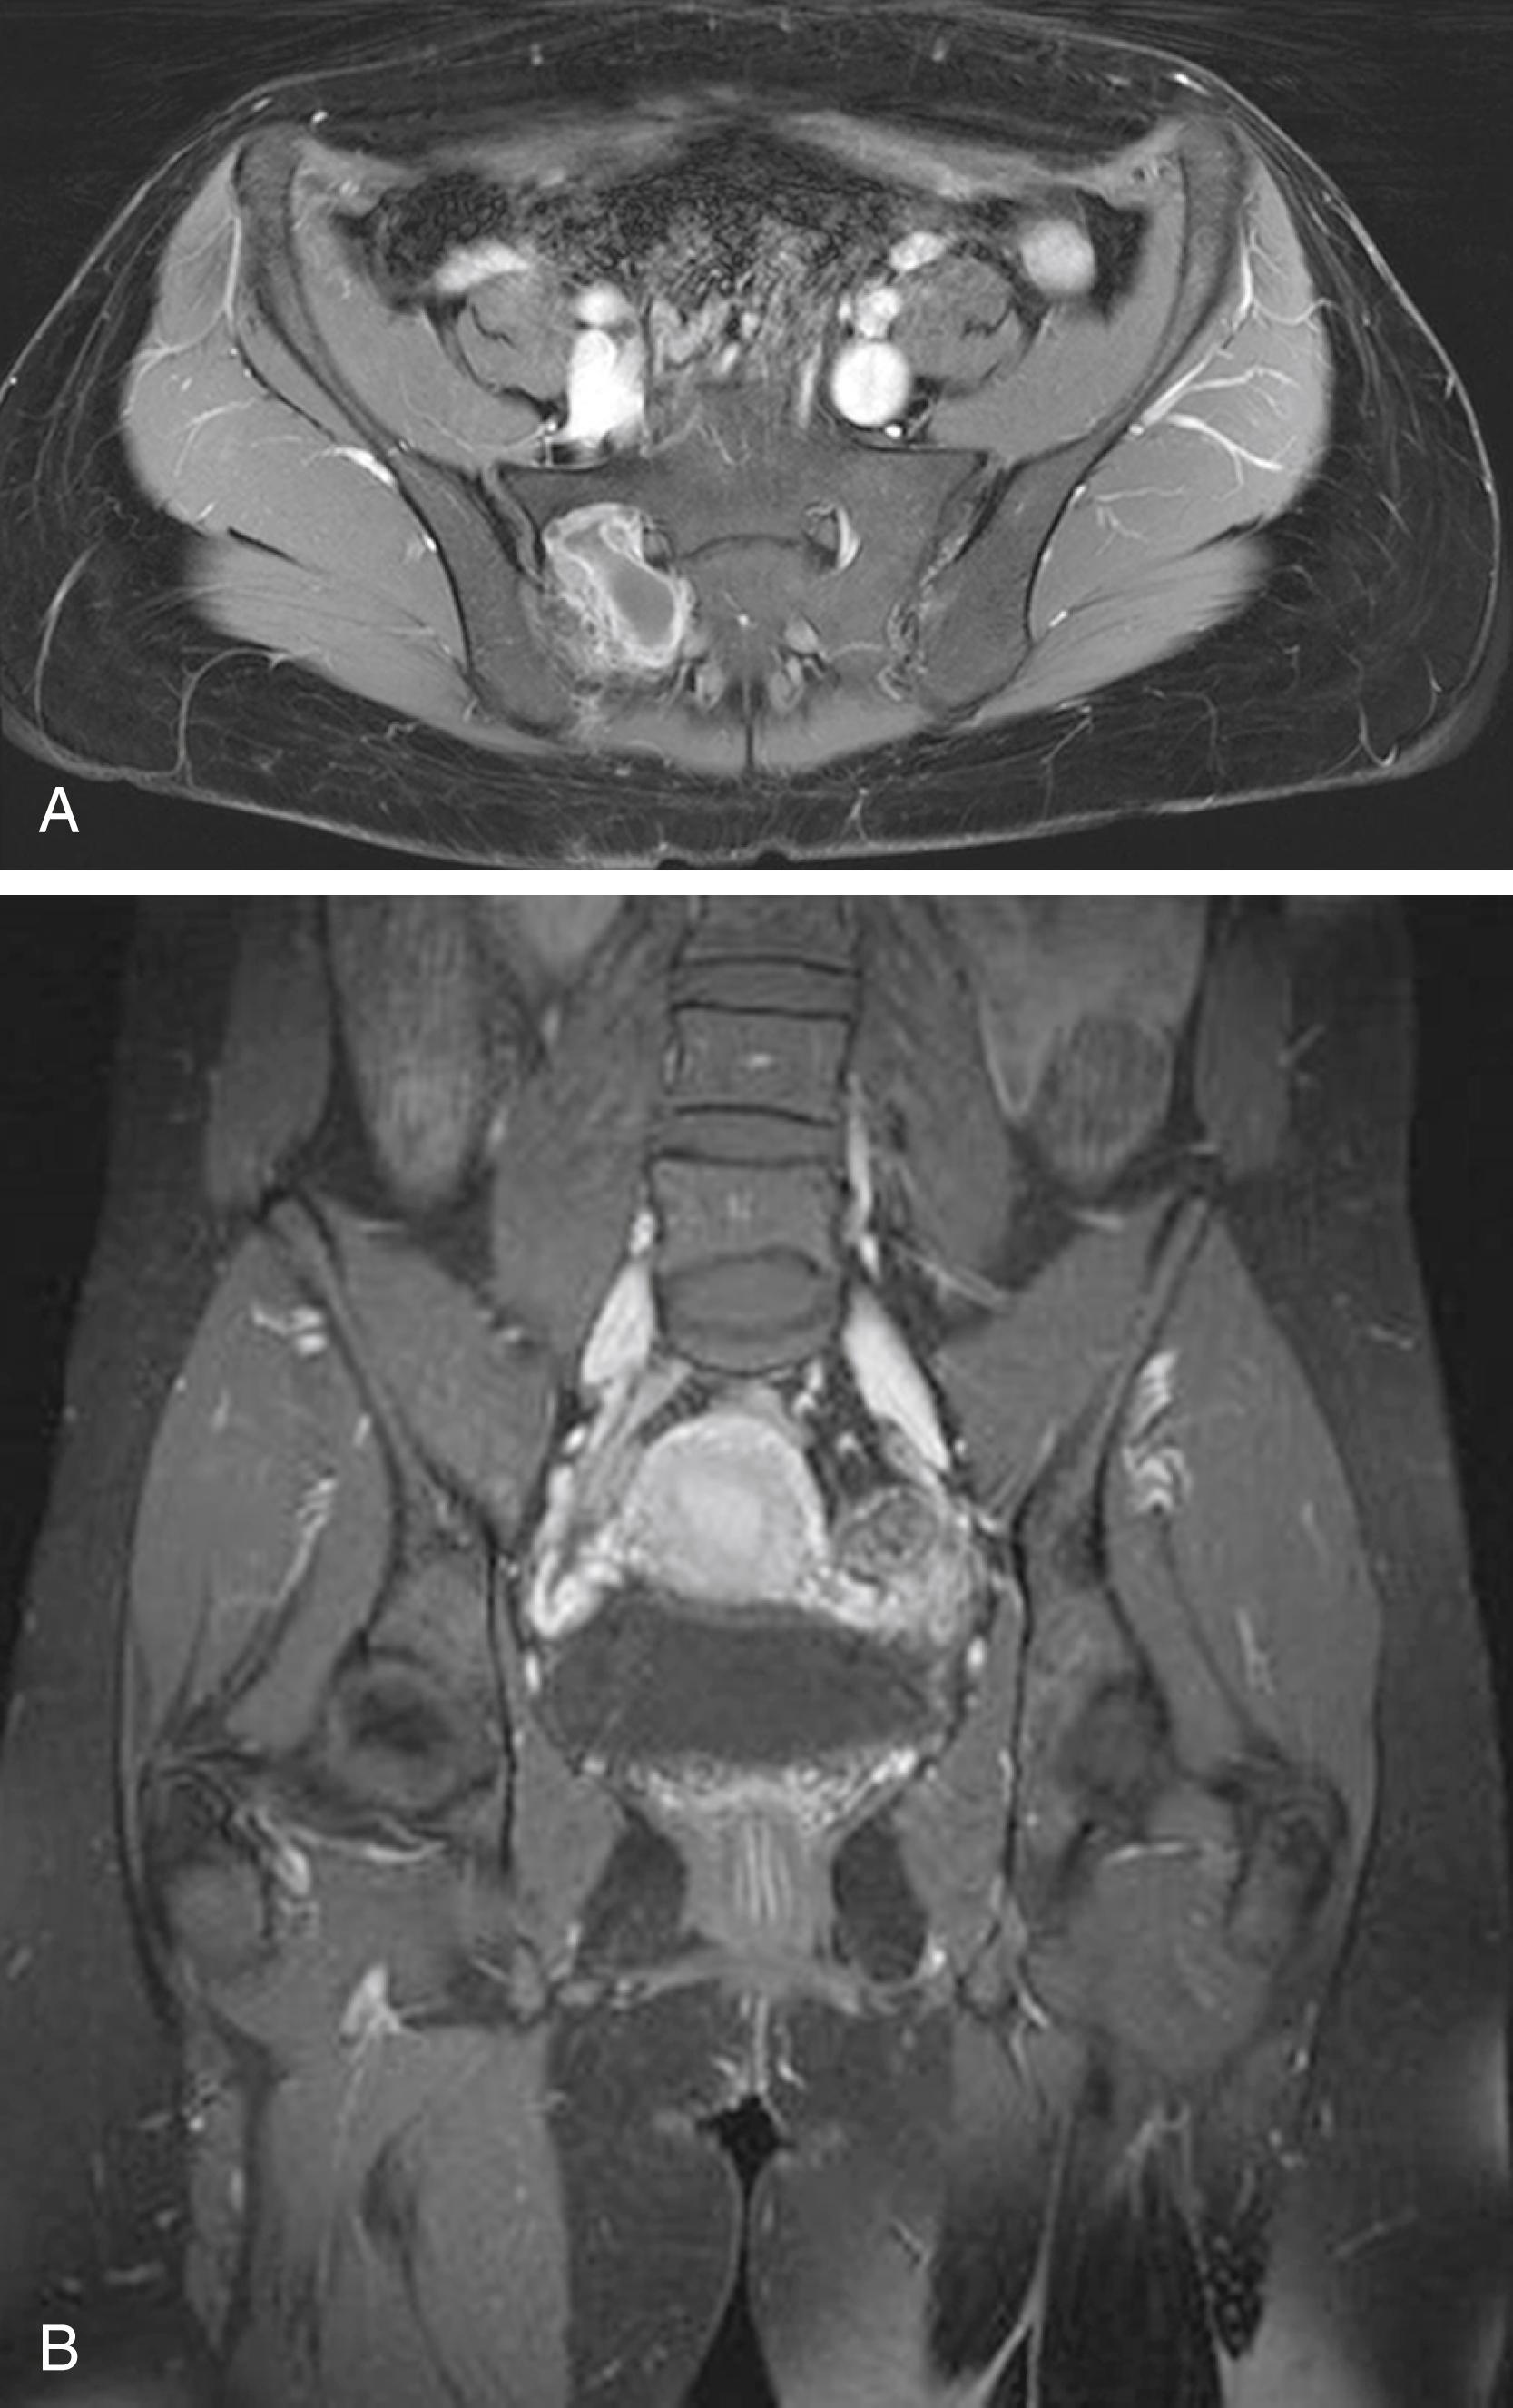 Fig. 158.7, Magnetic resonance imaging of the pelvis from ( A ) axial and ( B ) coronal views: Lobulated T1 hypointense, T2 hyperintense, heterogeneously enhancing mass within the right sacral ala measuring 4.3 × 3.4 × 3.0 cm. The mass is immediately adjacent to the right S1 nerve root. Pathology confirmed the diagnosis of a giant cell tumor.